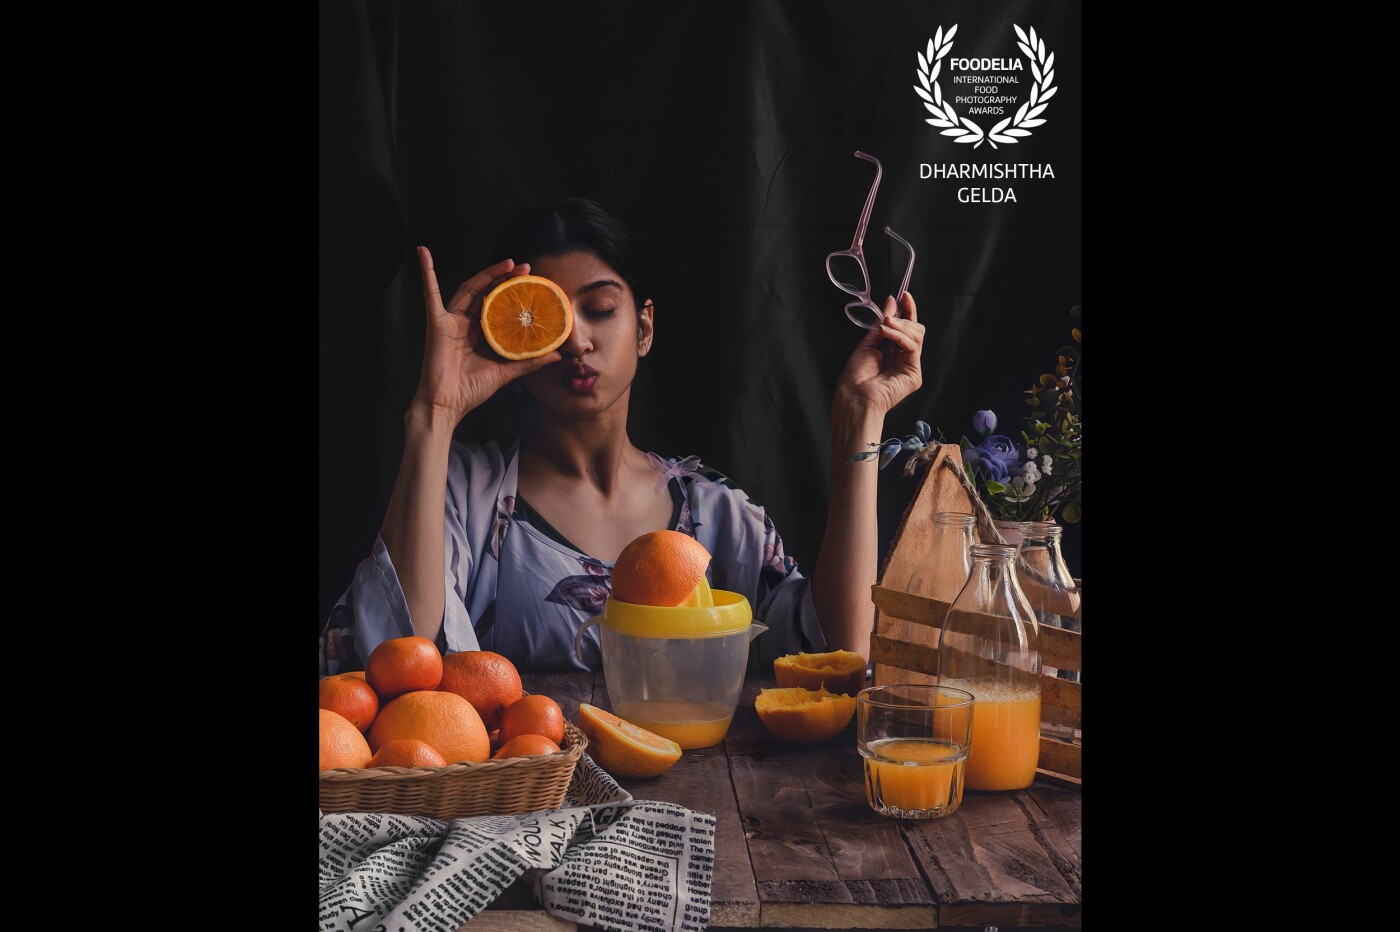 Sometimes, the best shoots are the ones that you do spontaneously. Usually naturally shy, I decided to jump on the bandwagon on this Orange shoot. I was feeling Zesty that morning and wanted to reflect my mood through this Citrus shoot. Hope you enjoy the fruits of my labor.